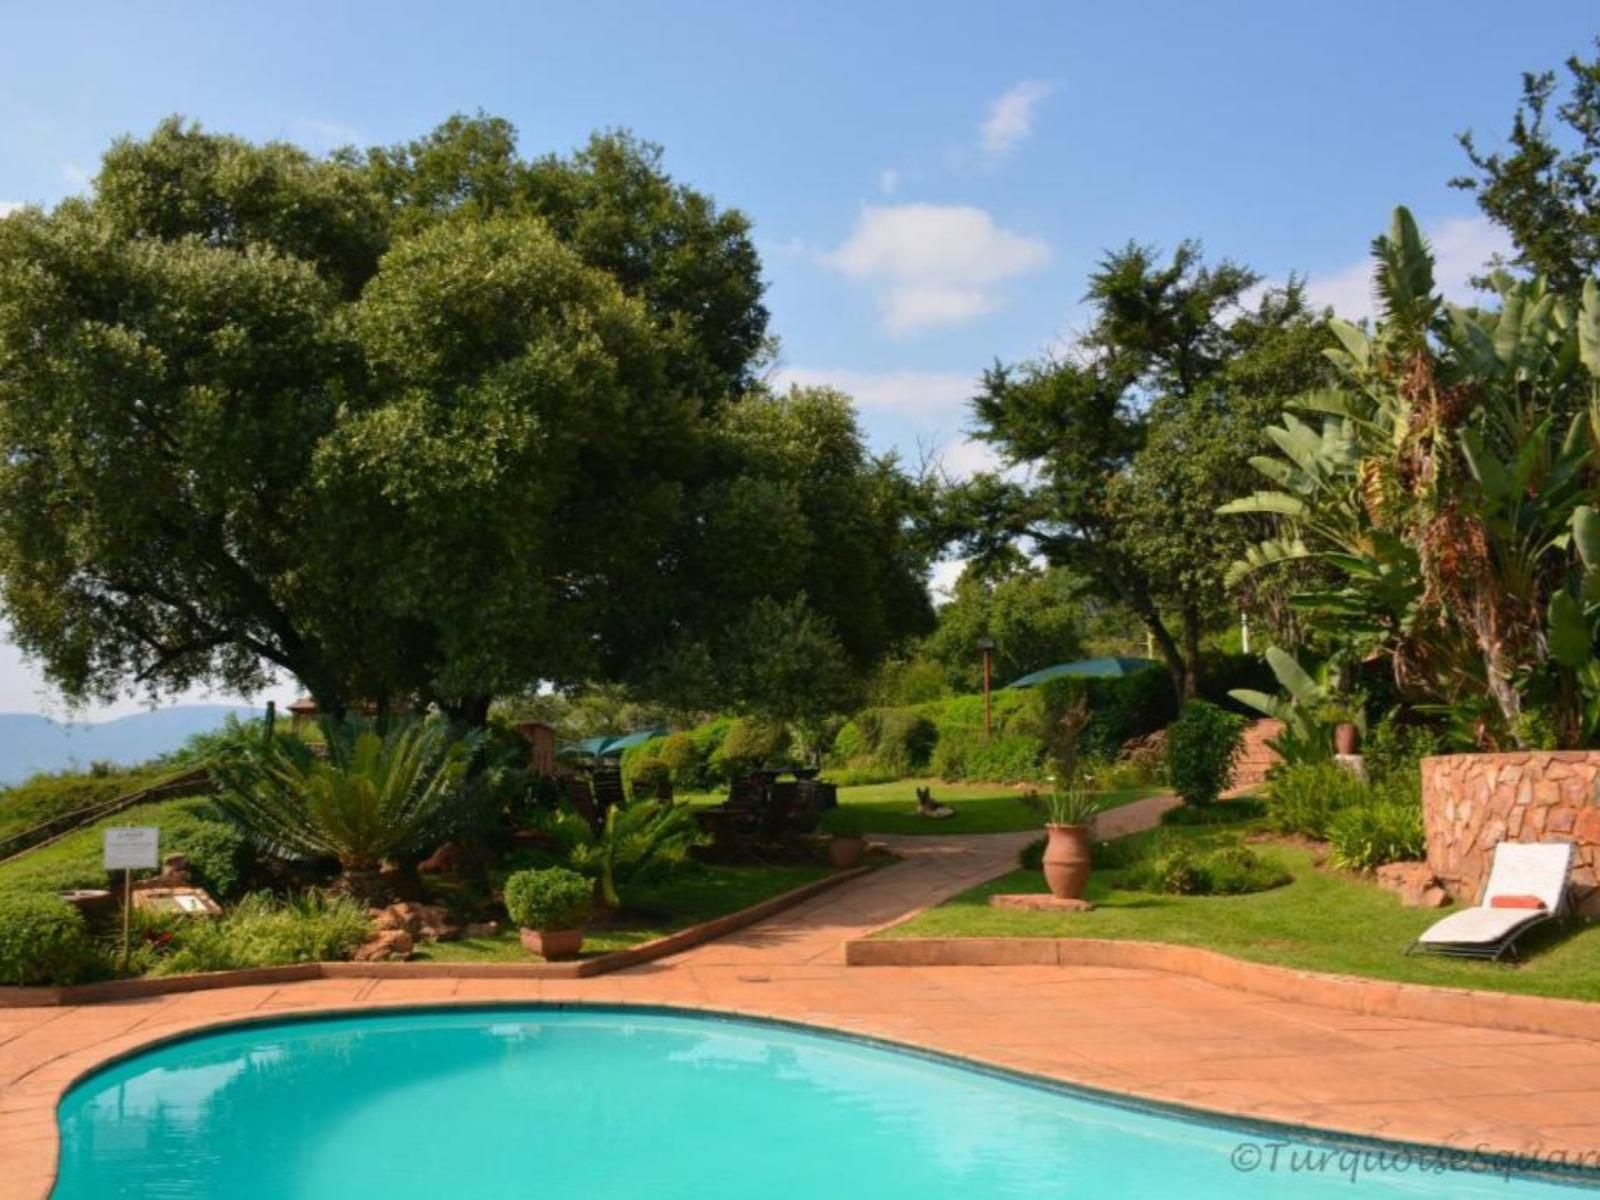 La Montagne Guest Lodge Broederstroom Hartbeespoort North West Province South Africa Complementary Colors, Palm Tree, Plant, Nature, Wood, Garden, Swimming Pool